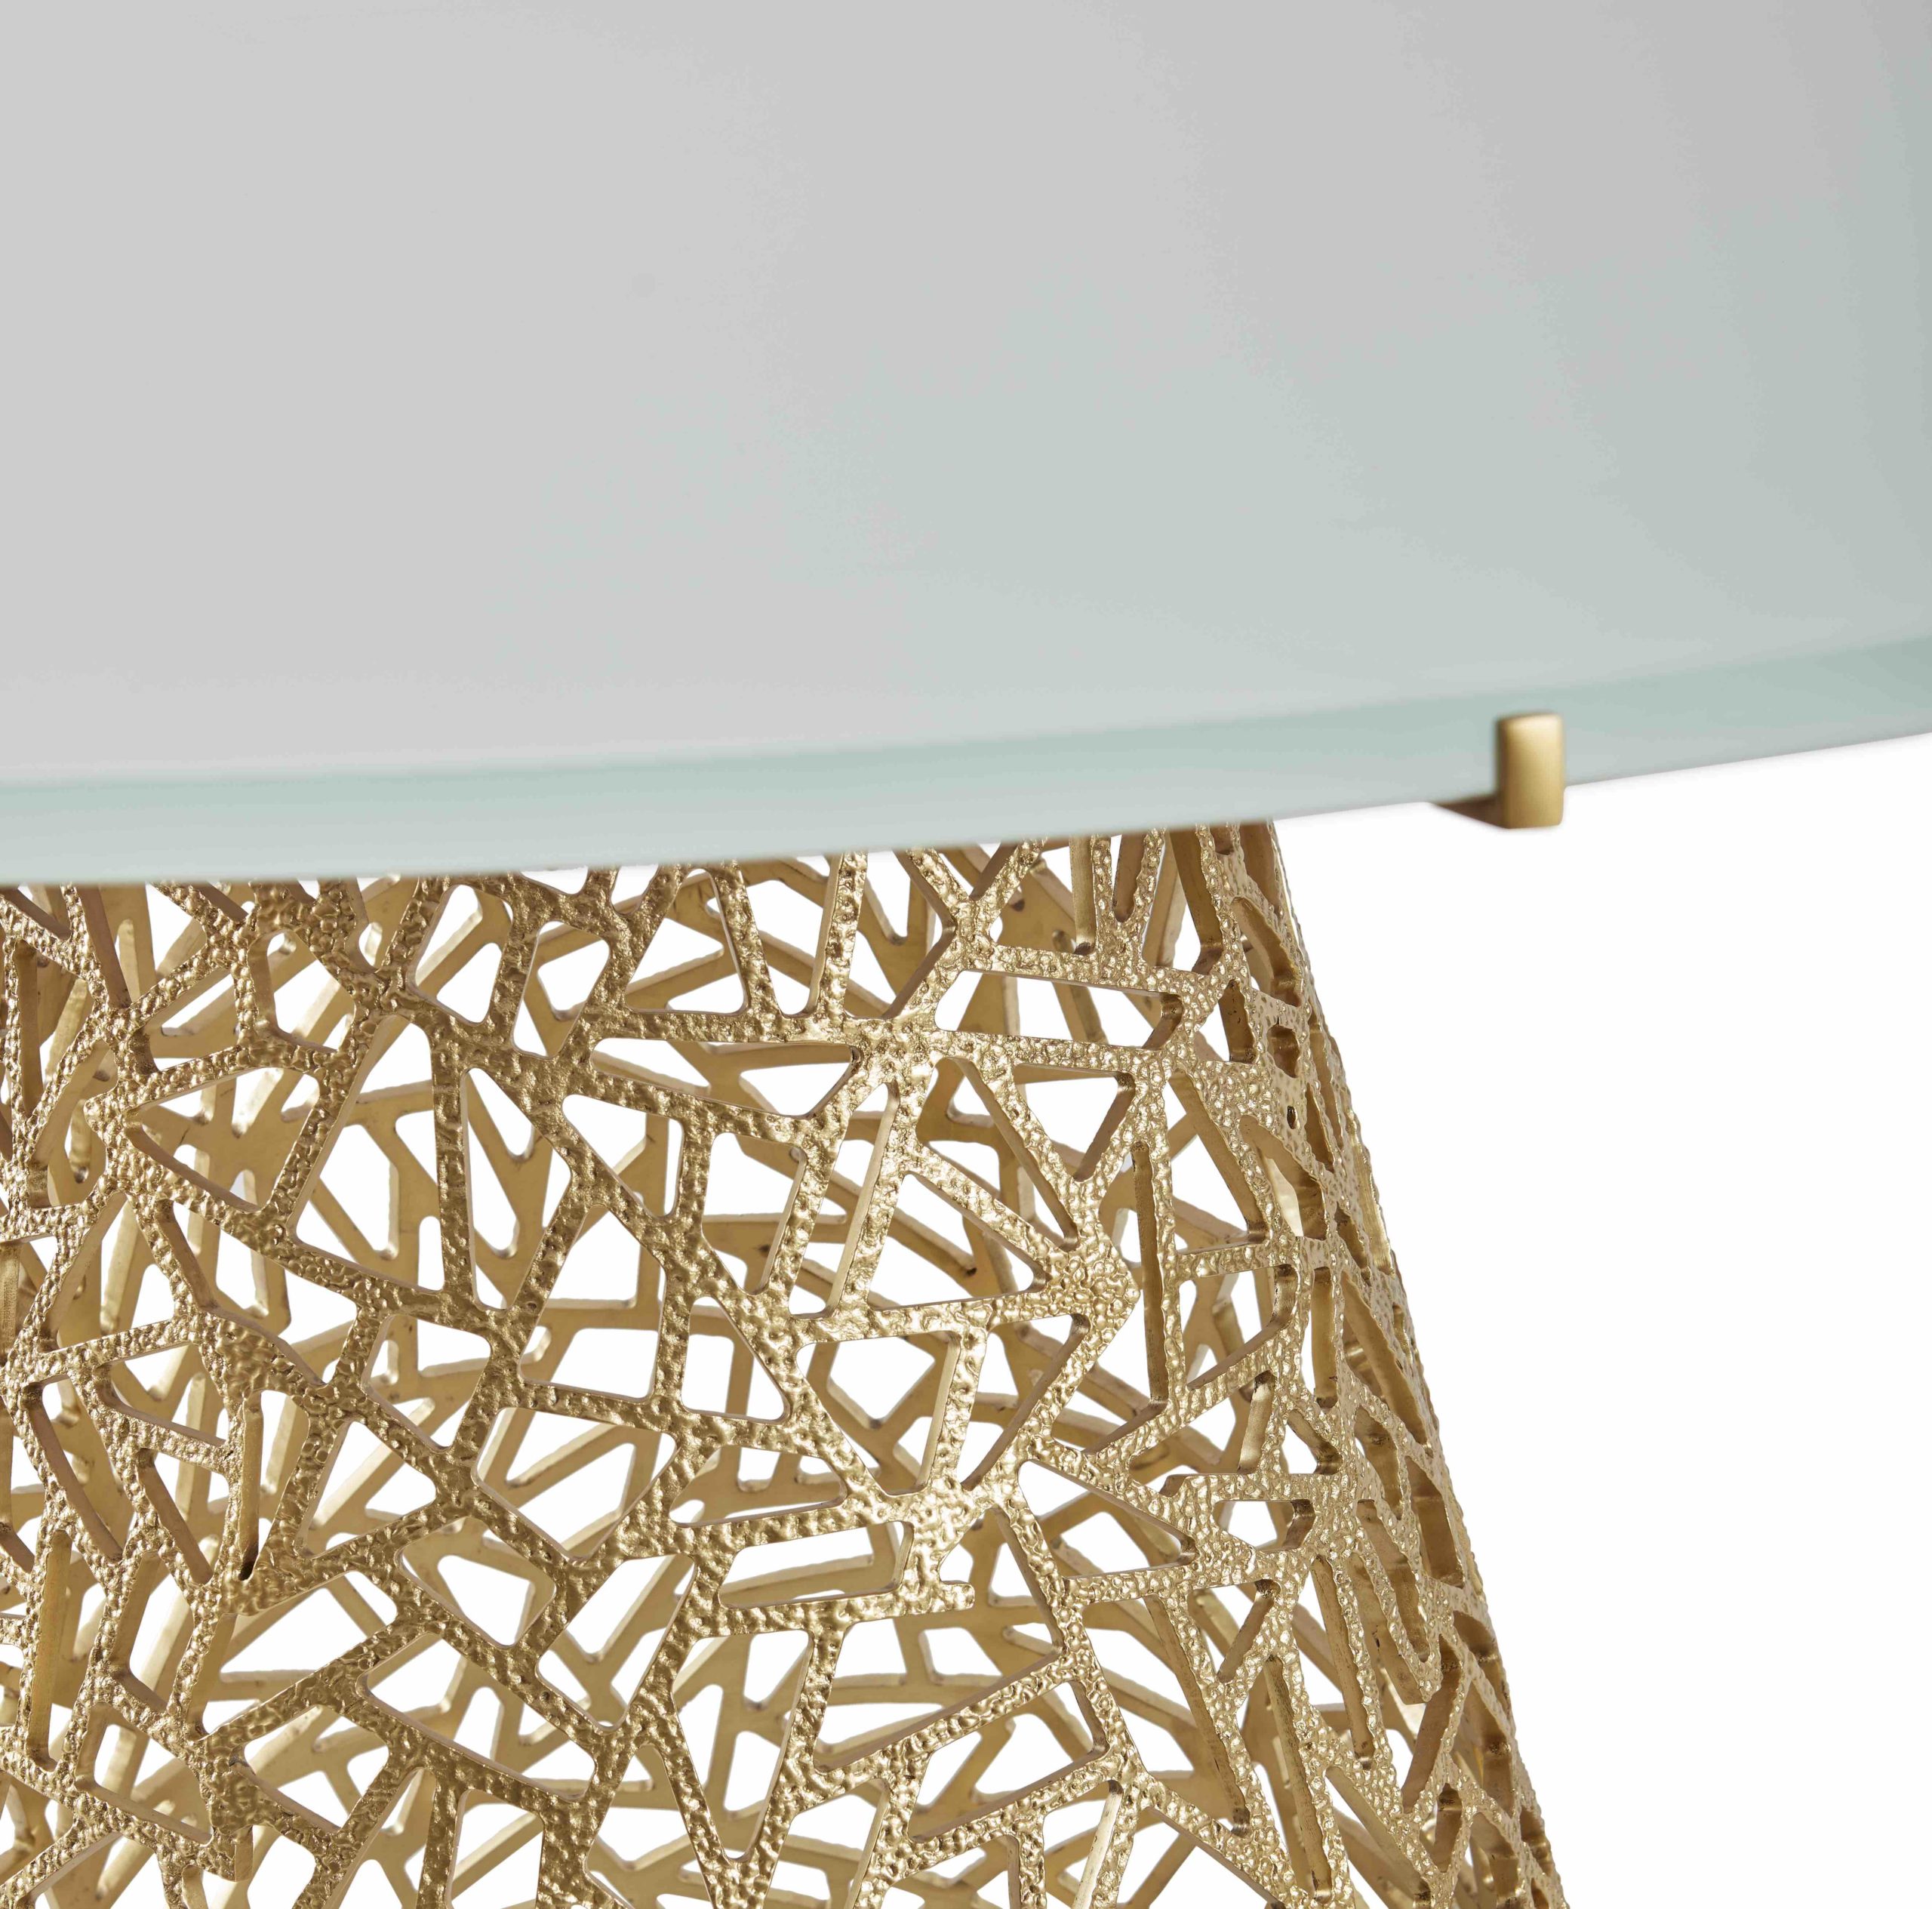 Baker_products_WNWN_filigree_table_BAA3236_DETAIL-scaled-2